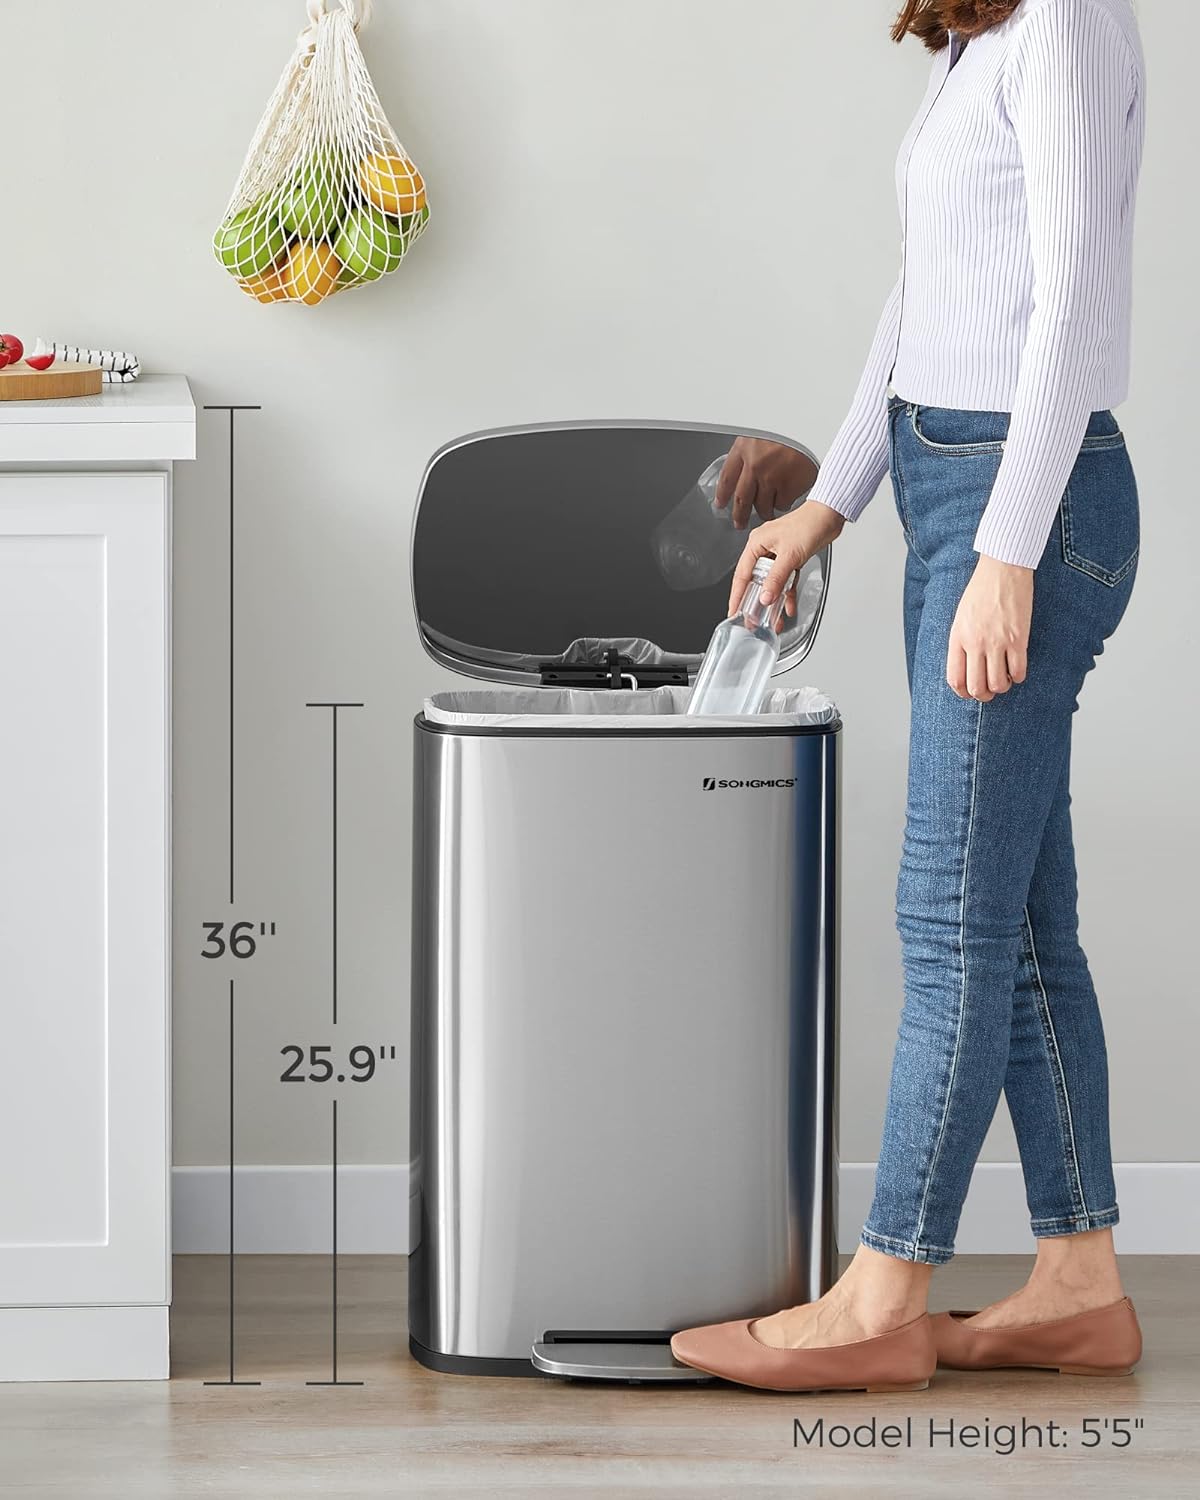 https://bigbigmart.com/wp-content/uploads/2023/11/SONGMICS-13-Gallon-Trash-Can-Stainless-Steel-Kitchen-Garbage-Can-Recycling-or-Waste-Bin-Soft-Close-Step-On-Pedal-Removable-Inner-Bucket-Silver-ULTB050E017.jpg